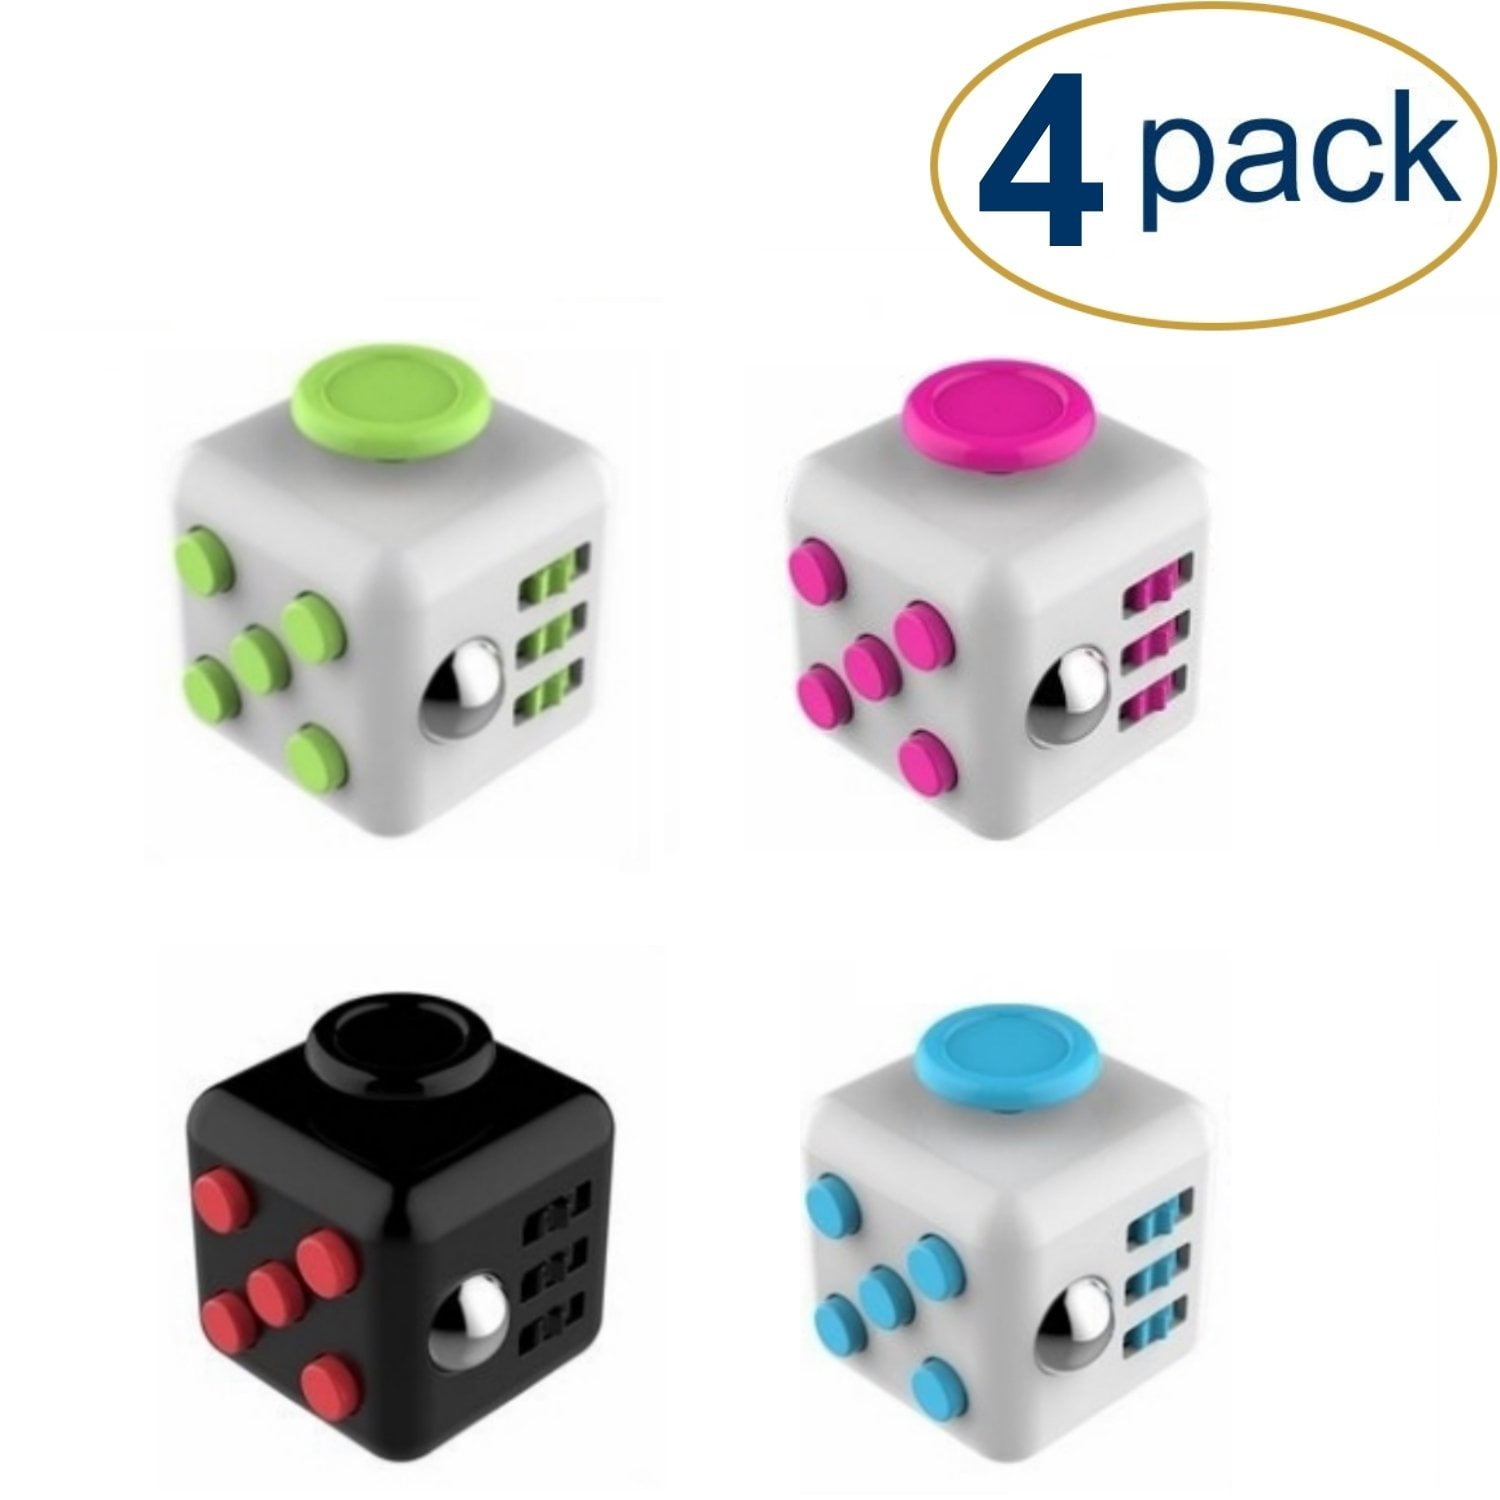 Cube Stress Relief Toys For Adults Kids For ADHD OCD ADD Funny Fidget Game Small Cube For The Classroom And Office Daybreak Magic Cube